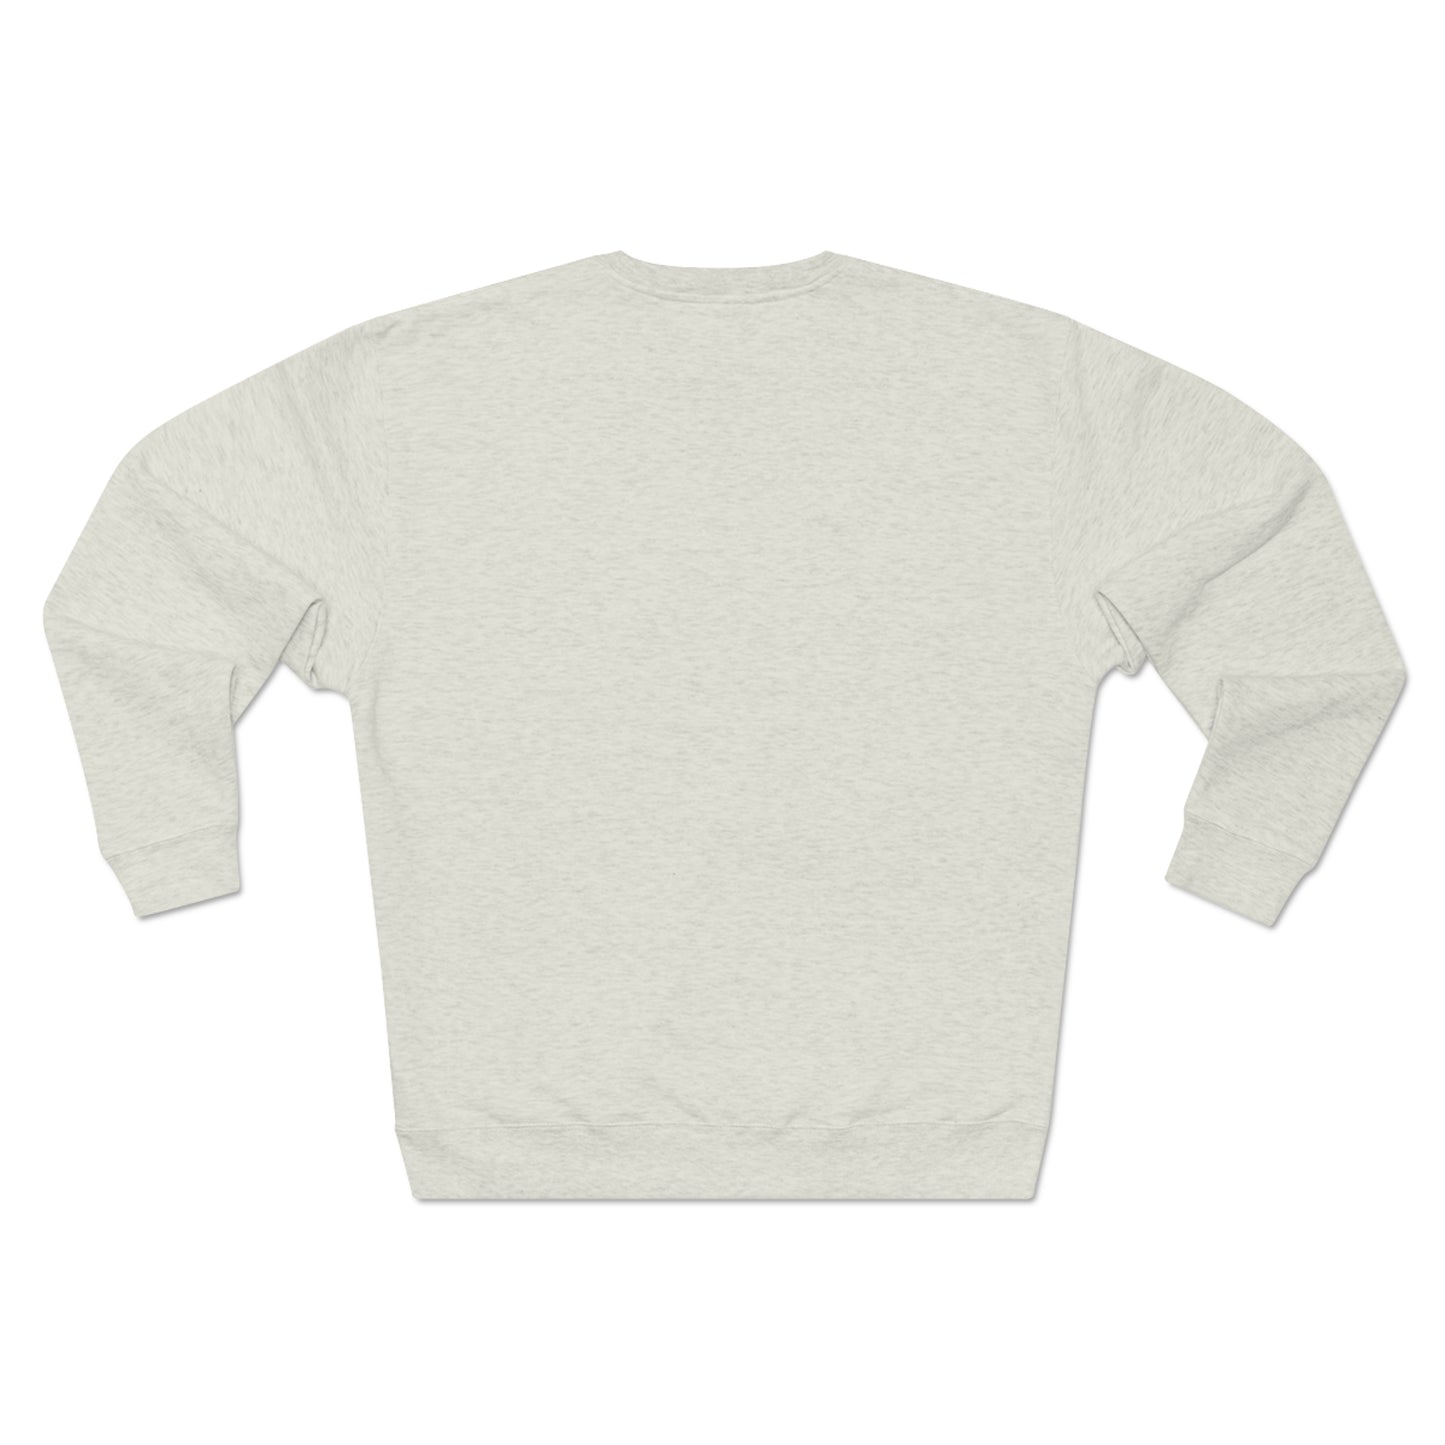 White Oyster Crew Neck Sweater